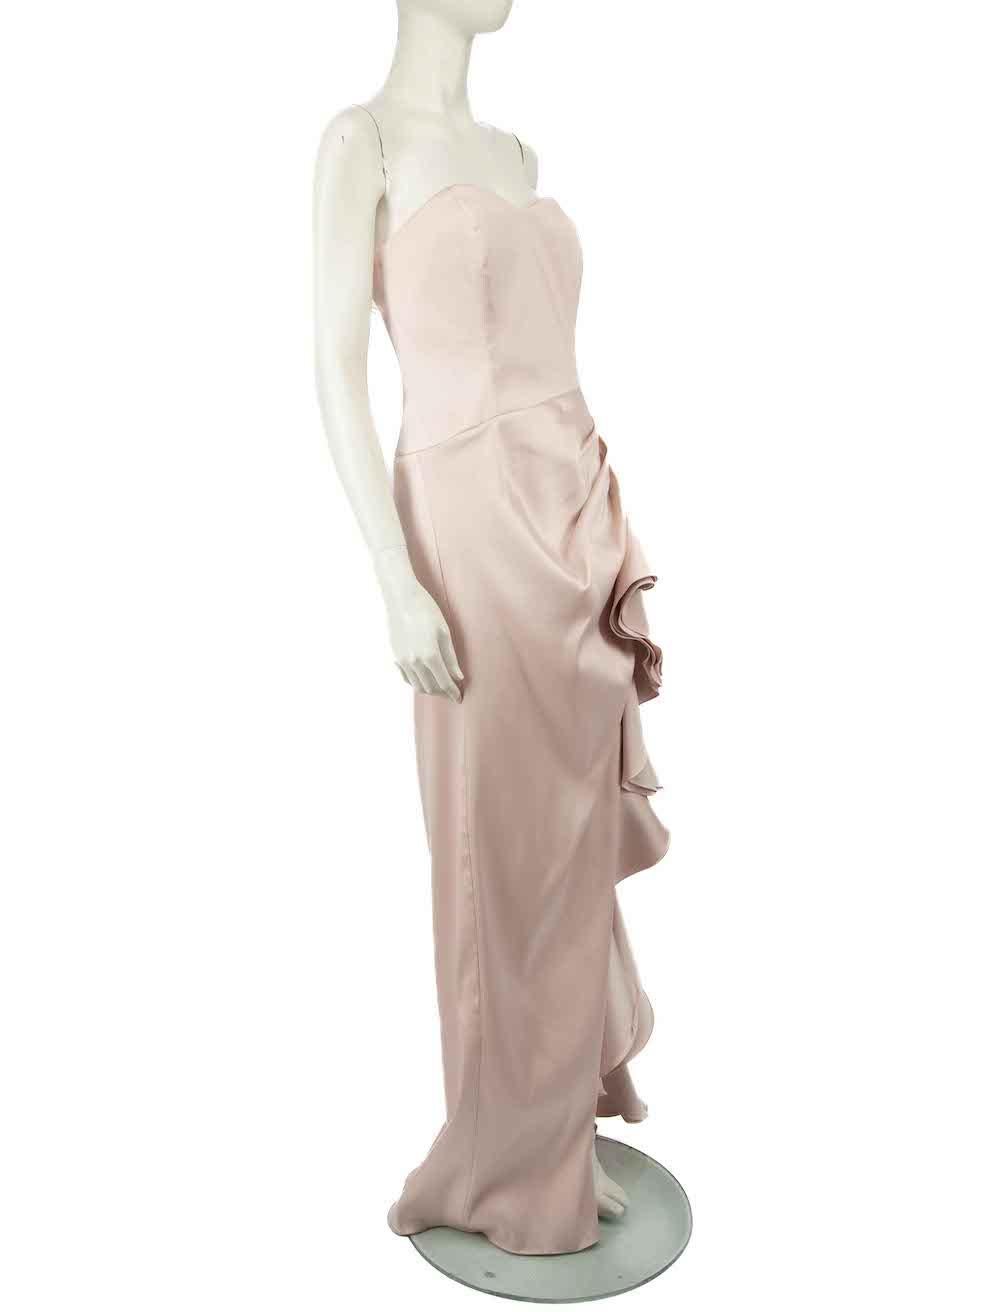 CONDITION is Very good. Minimal wear to dress is evident. Minimal fraying along hem and discolouration on the back and hem on this used Badgley Mischka designer resale item.
 
 
 
 Details
 
 
 Pink
 
 Polyester
 
 Gown
 
 Strapless
 
 Ruffle hem
 
